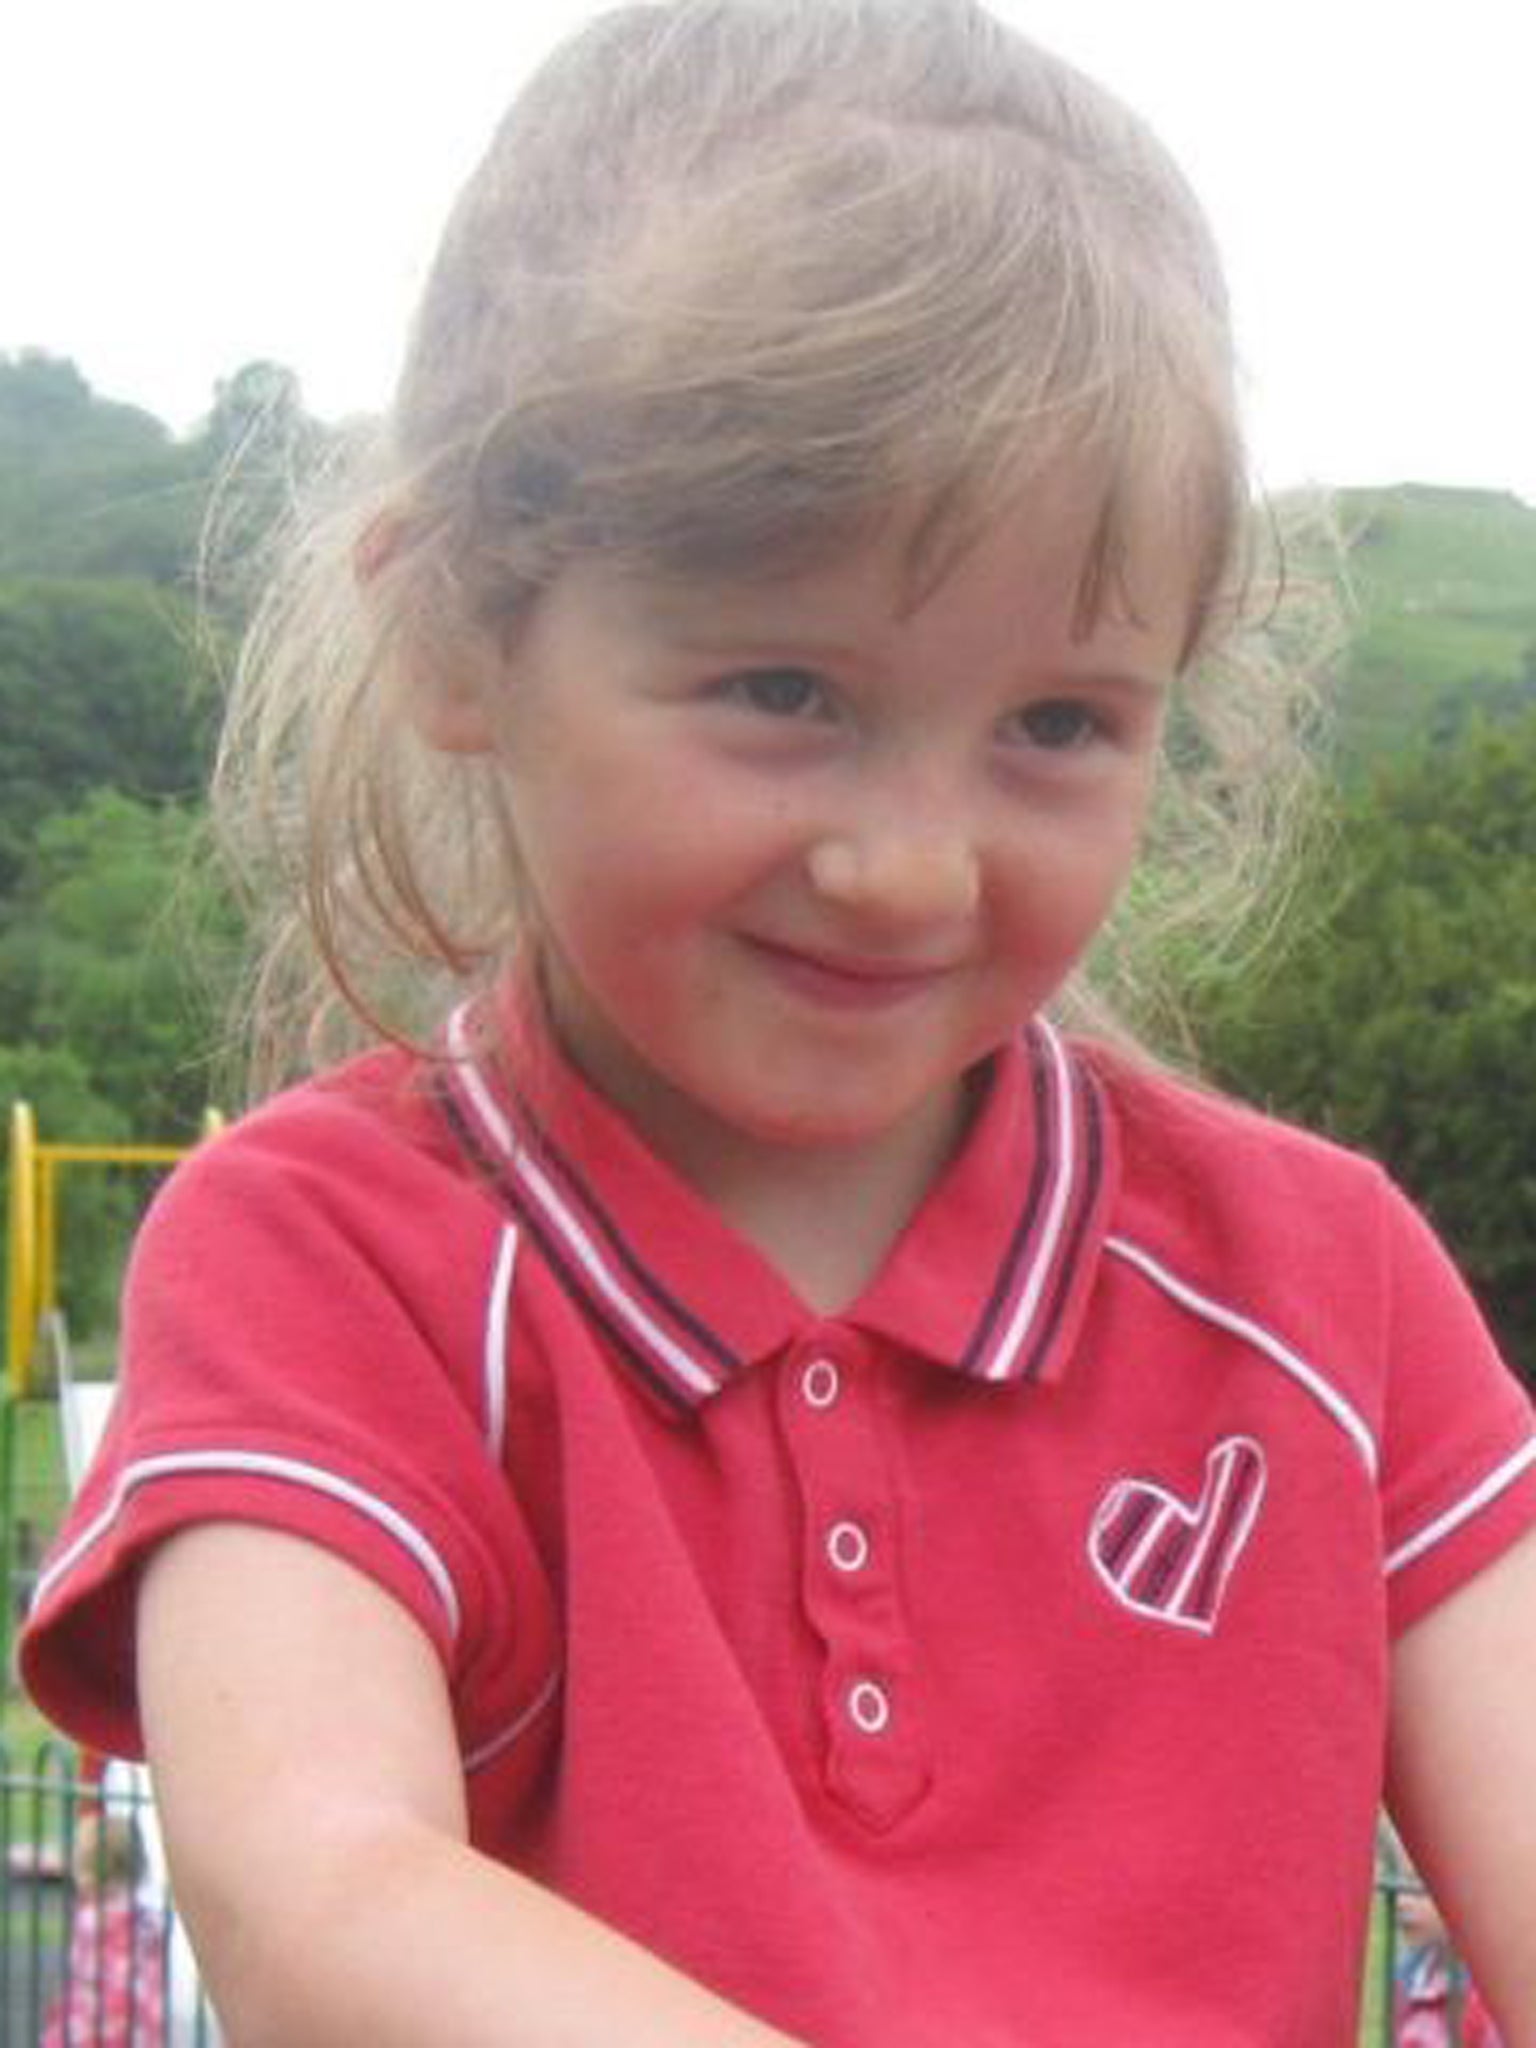 Five-year-old April vanished while playing with her friend near their homes in Machynlleth, Powys, Mid Wales, on October 1 last year